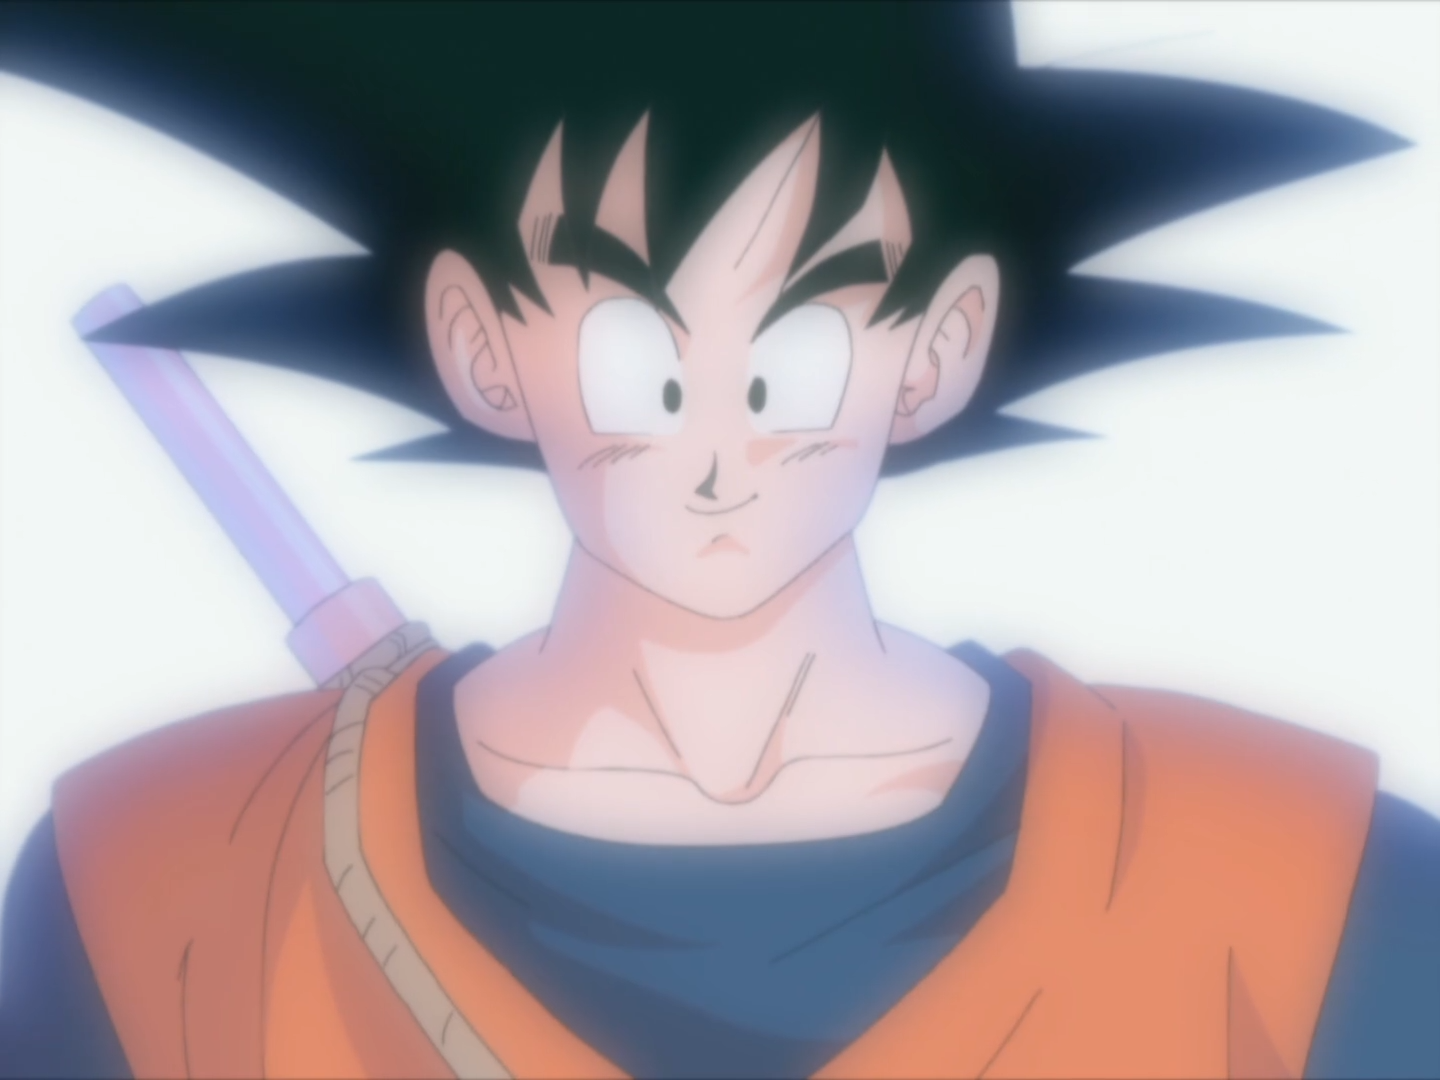 catherine ajaka recommends dragon ball z s1e1 pic